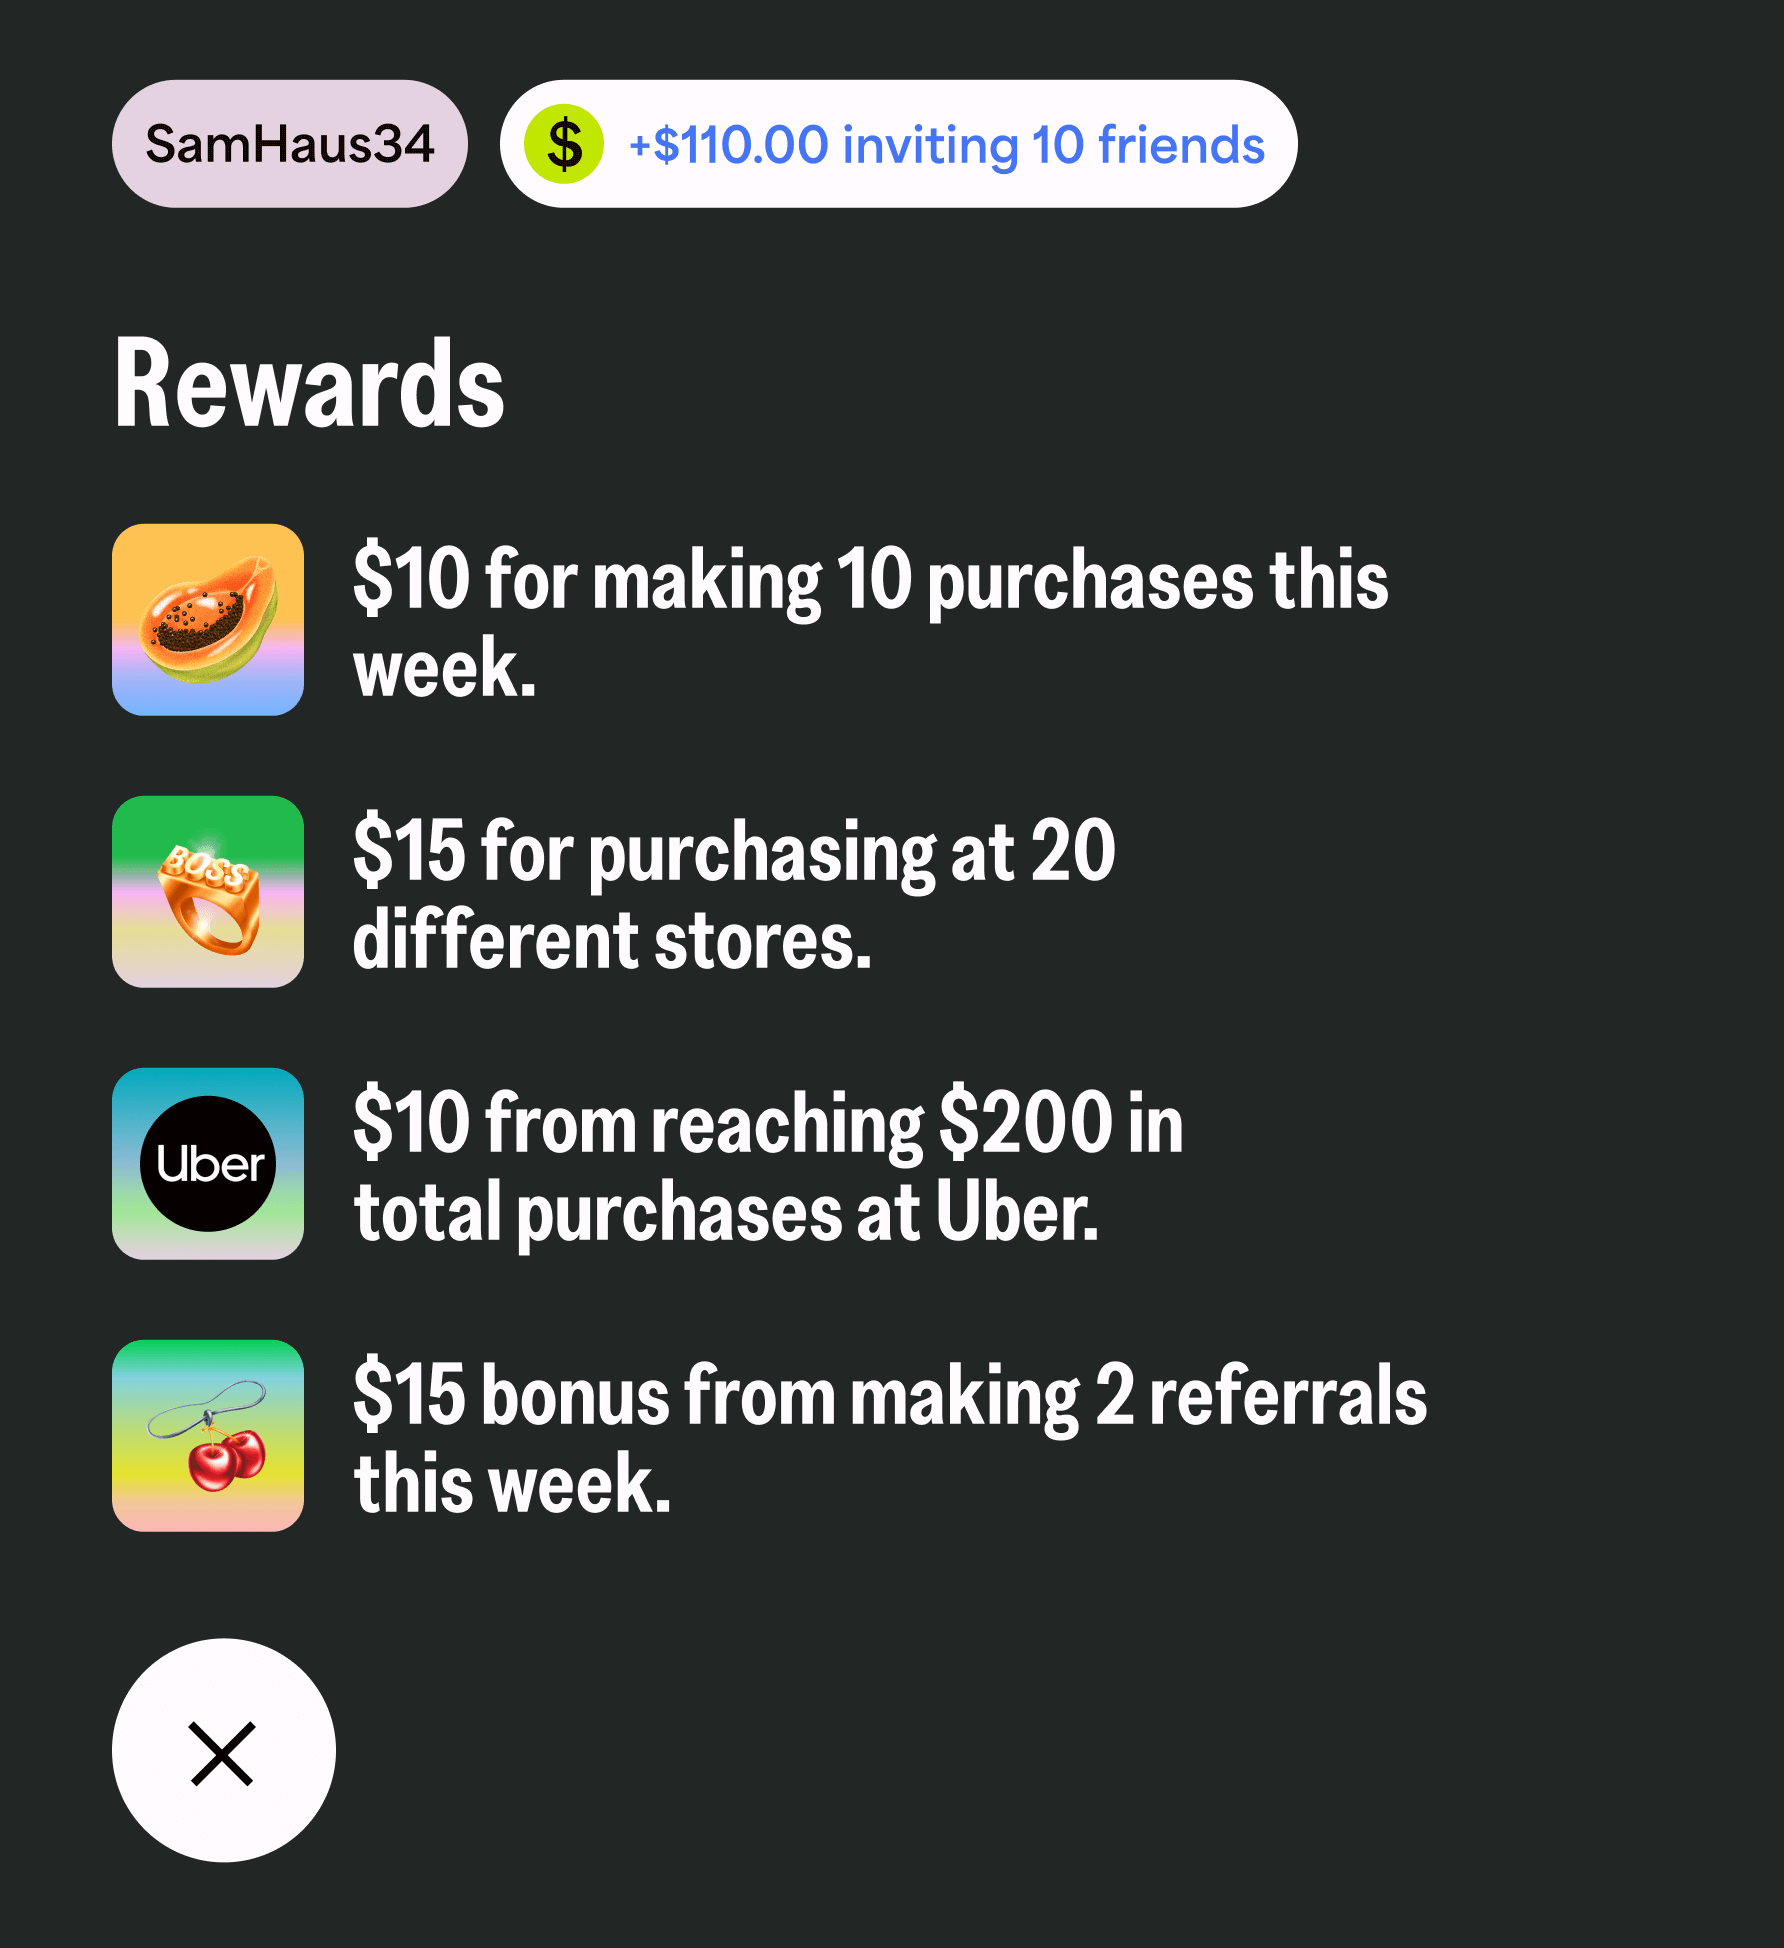 SamHaus34. +$110.00 inviting 10 friends. Rewards: $10 for making 10 purchases this week, $15 for purchasing at 20 different stores, $10 from reaching $200 in total purchases at Uber, $15 bonus from making 2 referrals this week.